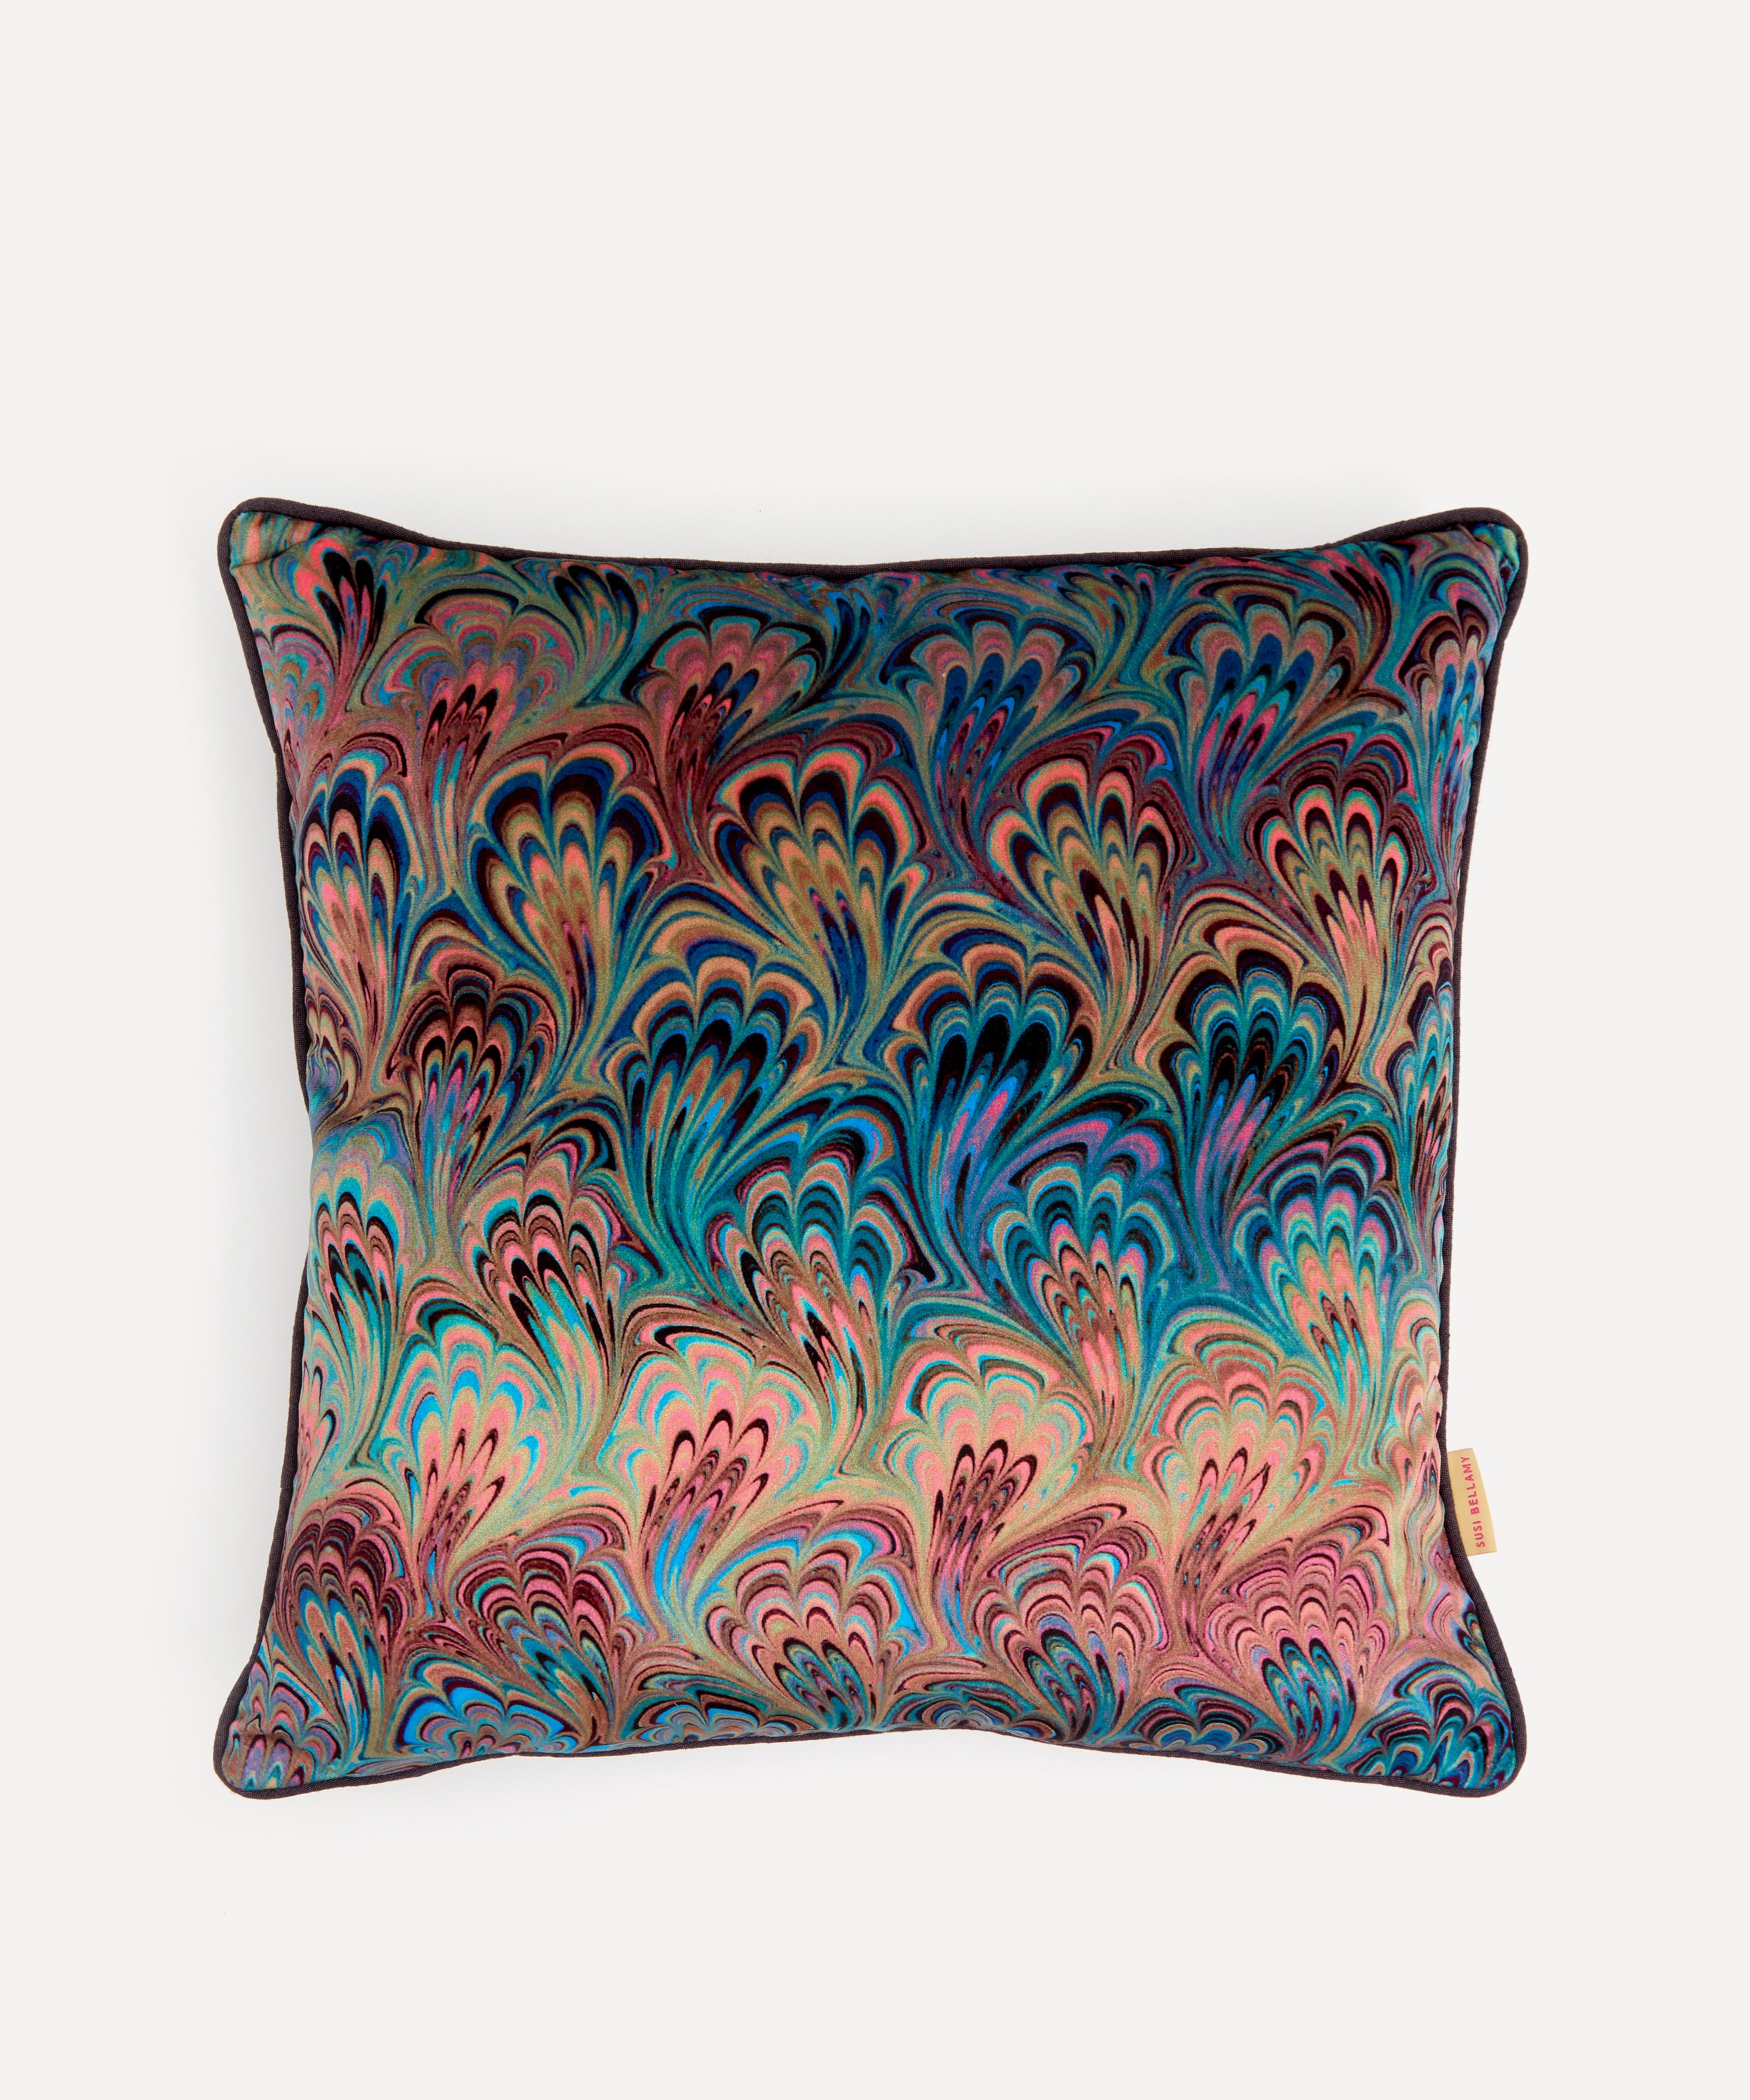 Susi Bellamy - Teal Bouquet Marbled Velvet Square Cushion